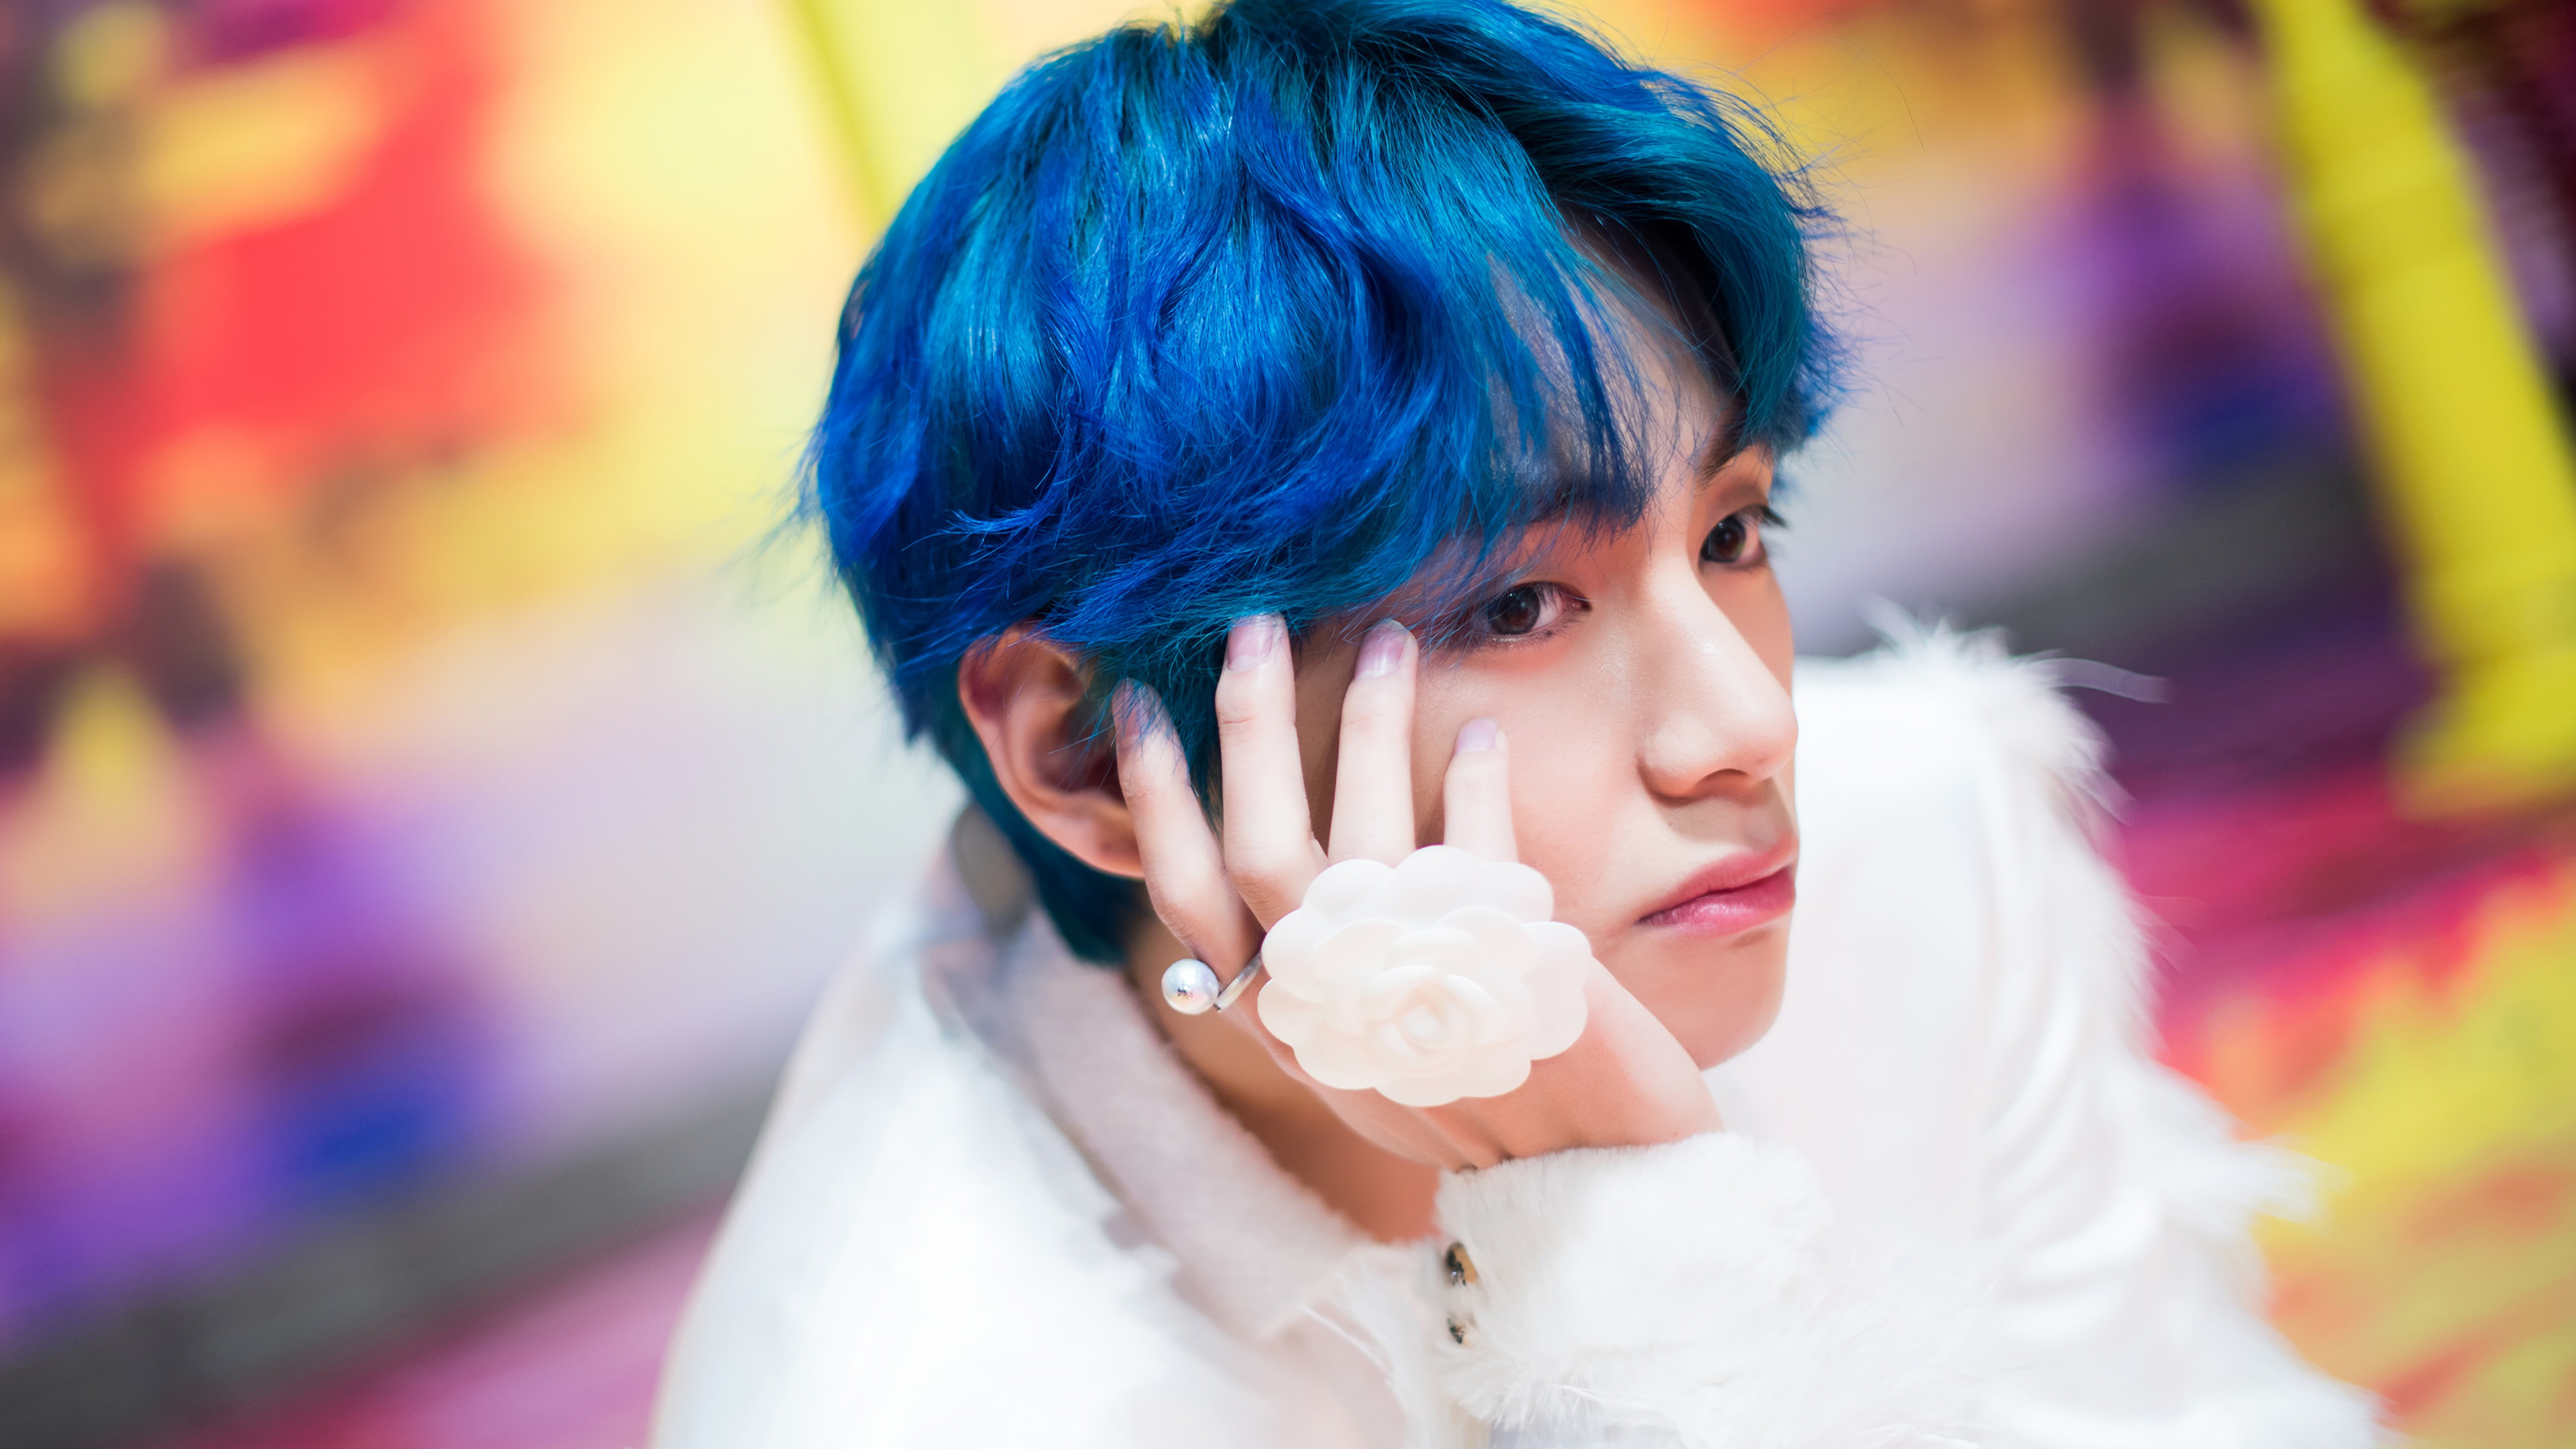 BTS' V's Blue Hair in "Boy With Luv" Concept Photos - wide 5